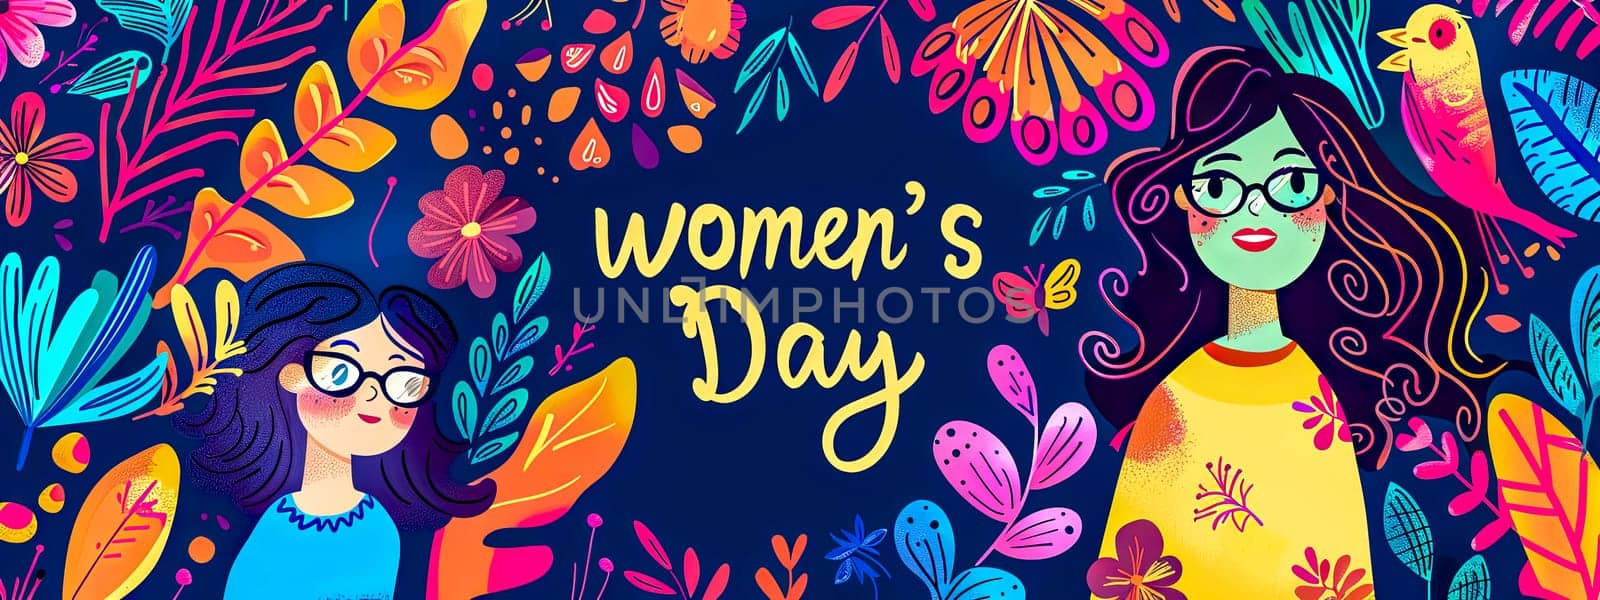 Vibrant women's day illustration with female figures by Edophoto